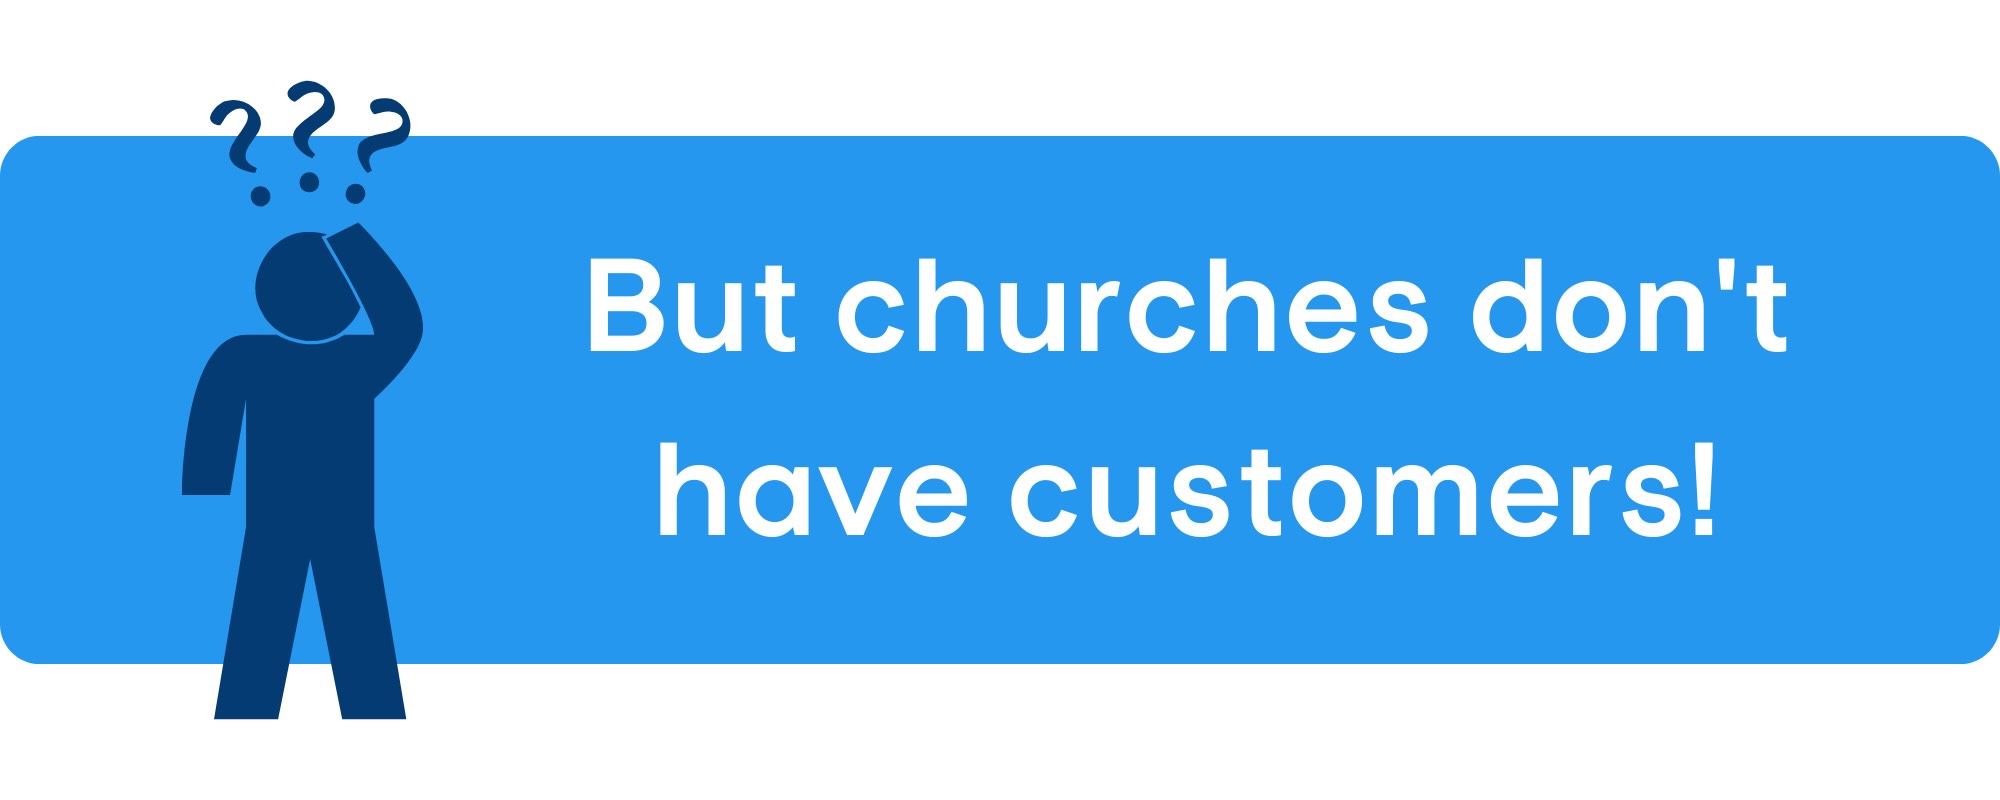 The best Church CRM software will help you manage relationships with your members